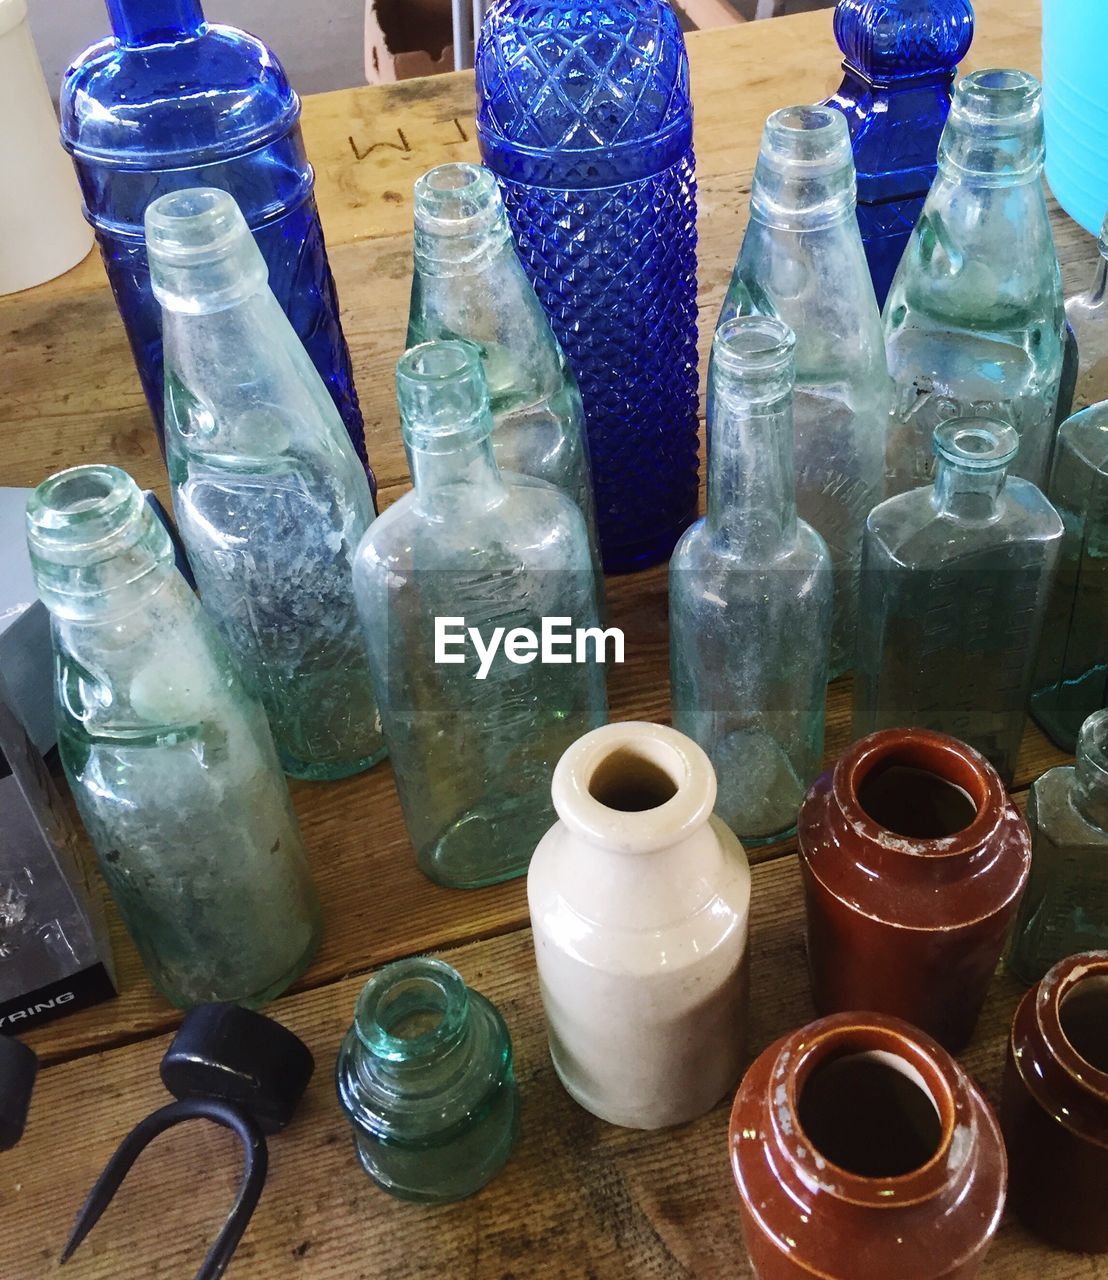 High angle view of various bottles on table